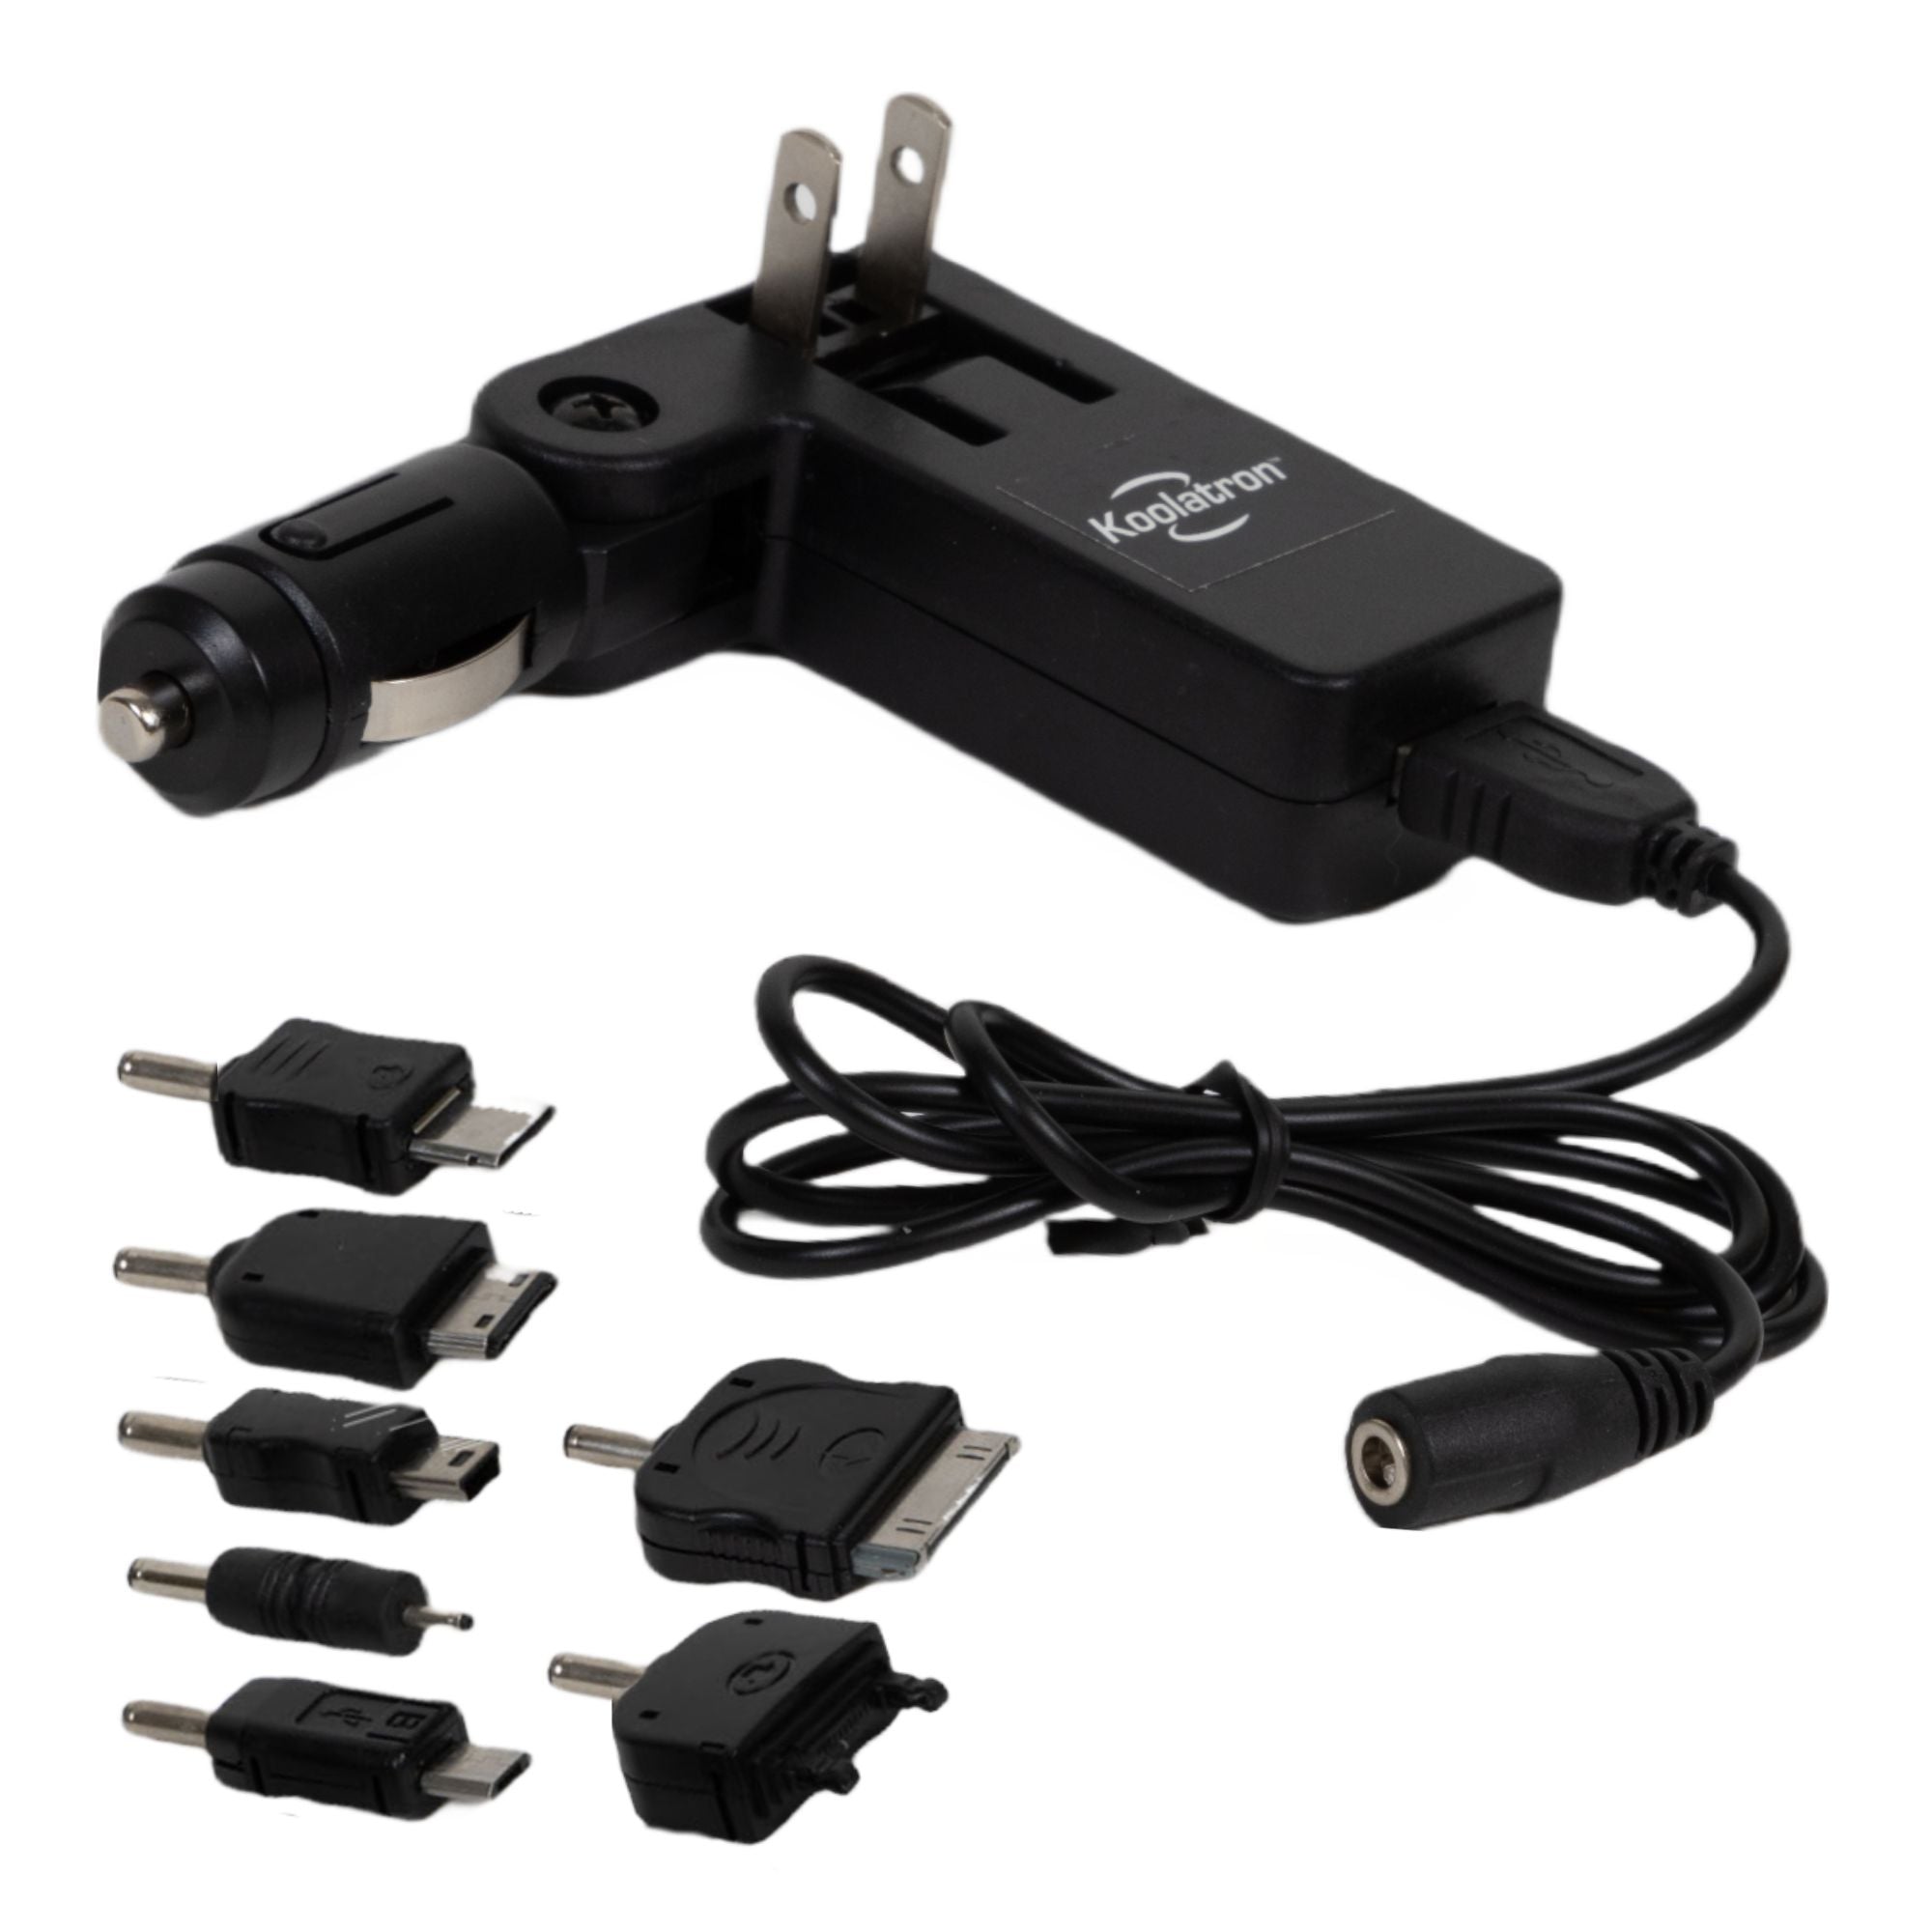 Koolatron 12V AC/DC Cell Phone Charger w/ USB Adapter Set, Universal  Charger w/ 12 Volt and 110 Volt Plugs, for Older Model Mobile Phones, MP3 